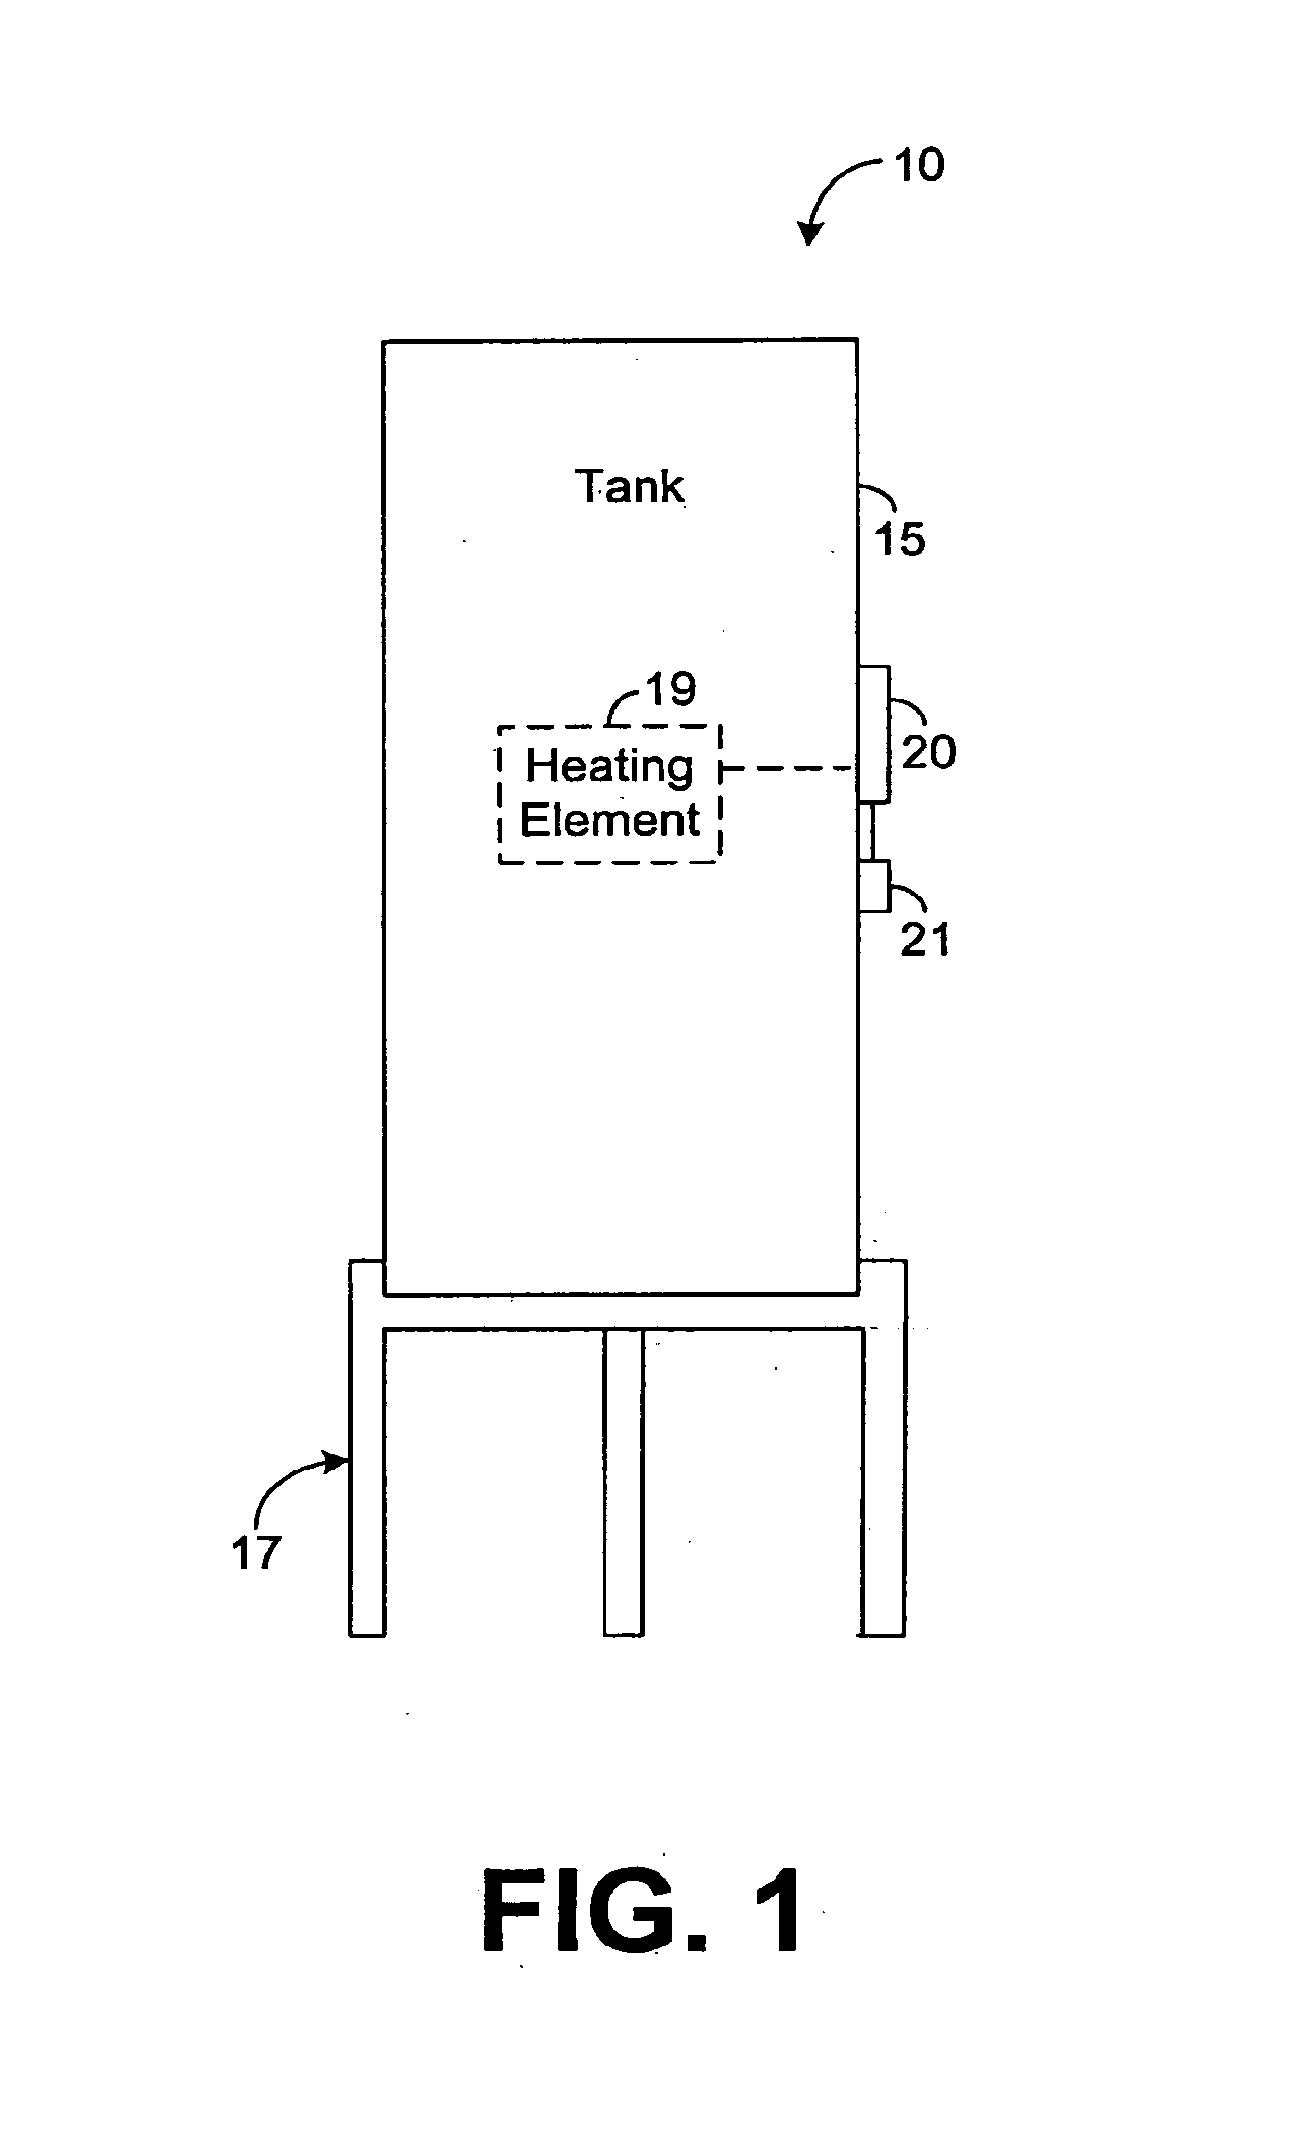 Modular control system and method for a water heater